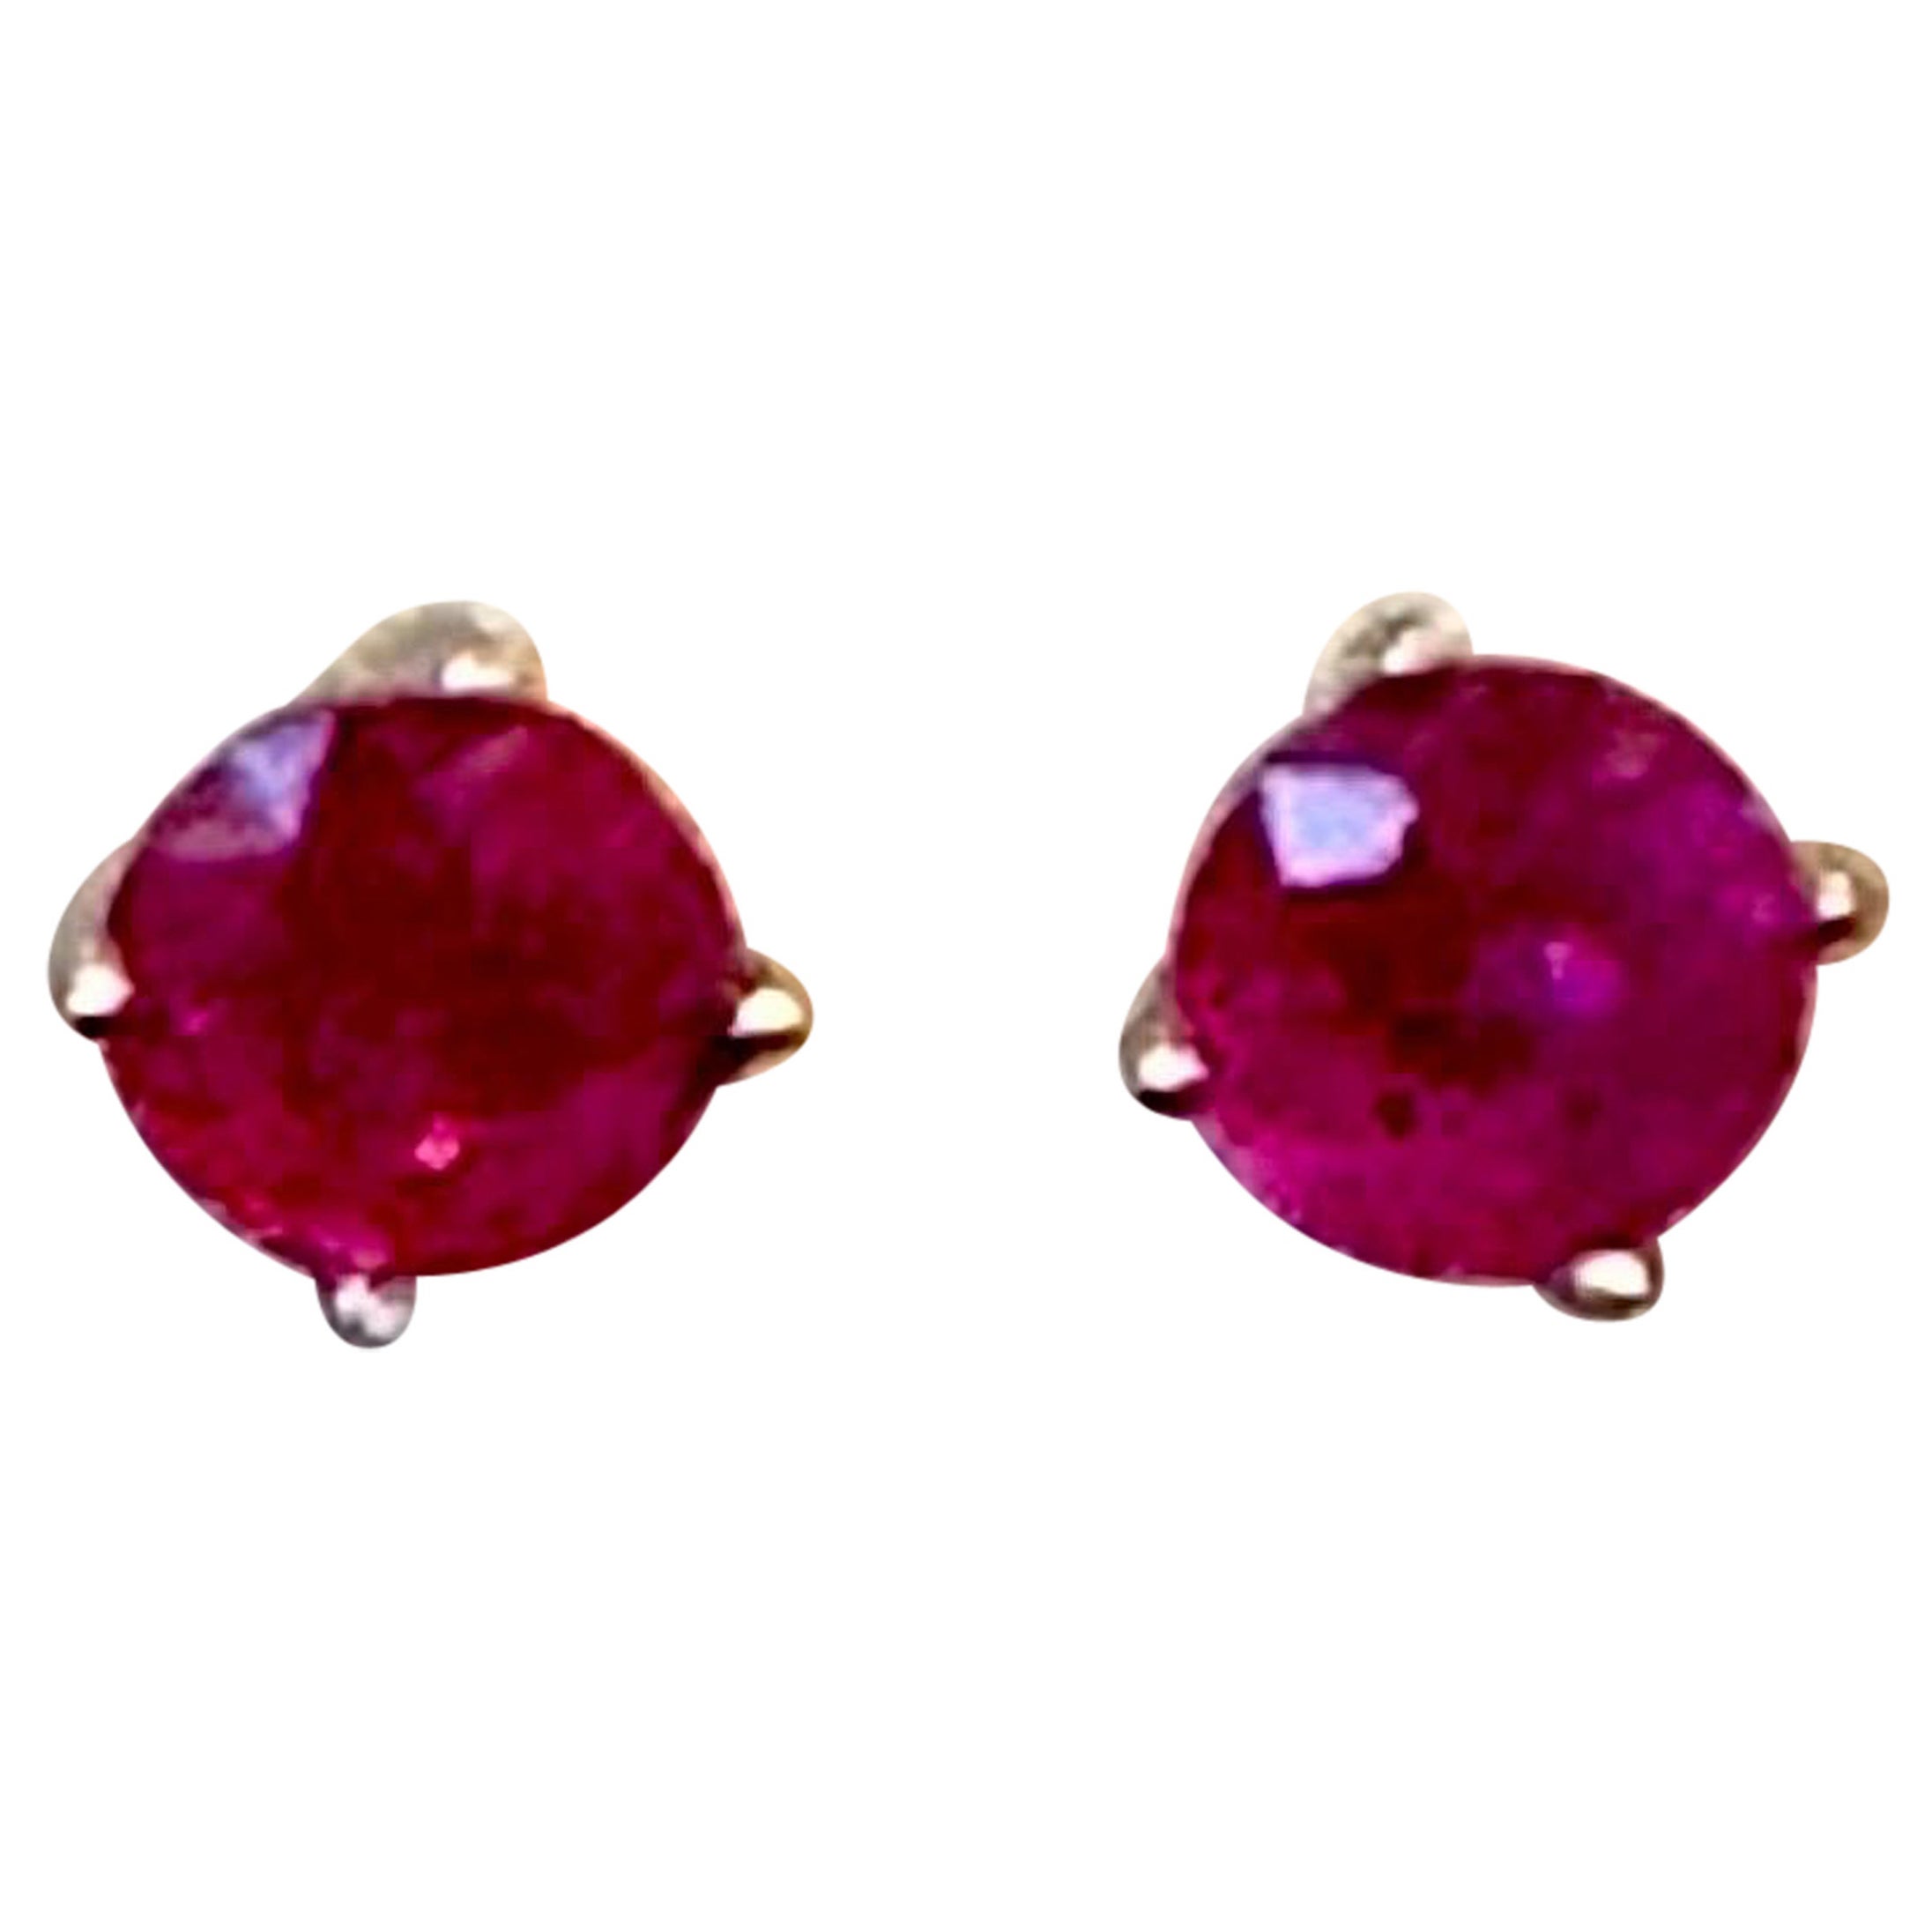 1 Carat  Solitaire Natural Ruby Earrings 4 Prongs Screw Back 14 Karat White Gold For Sale